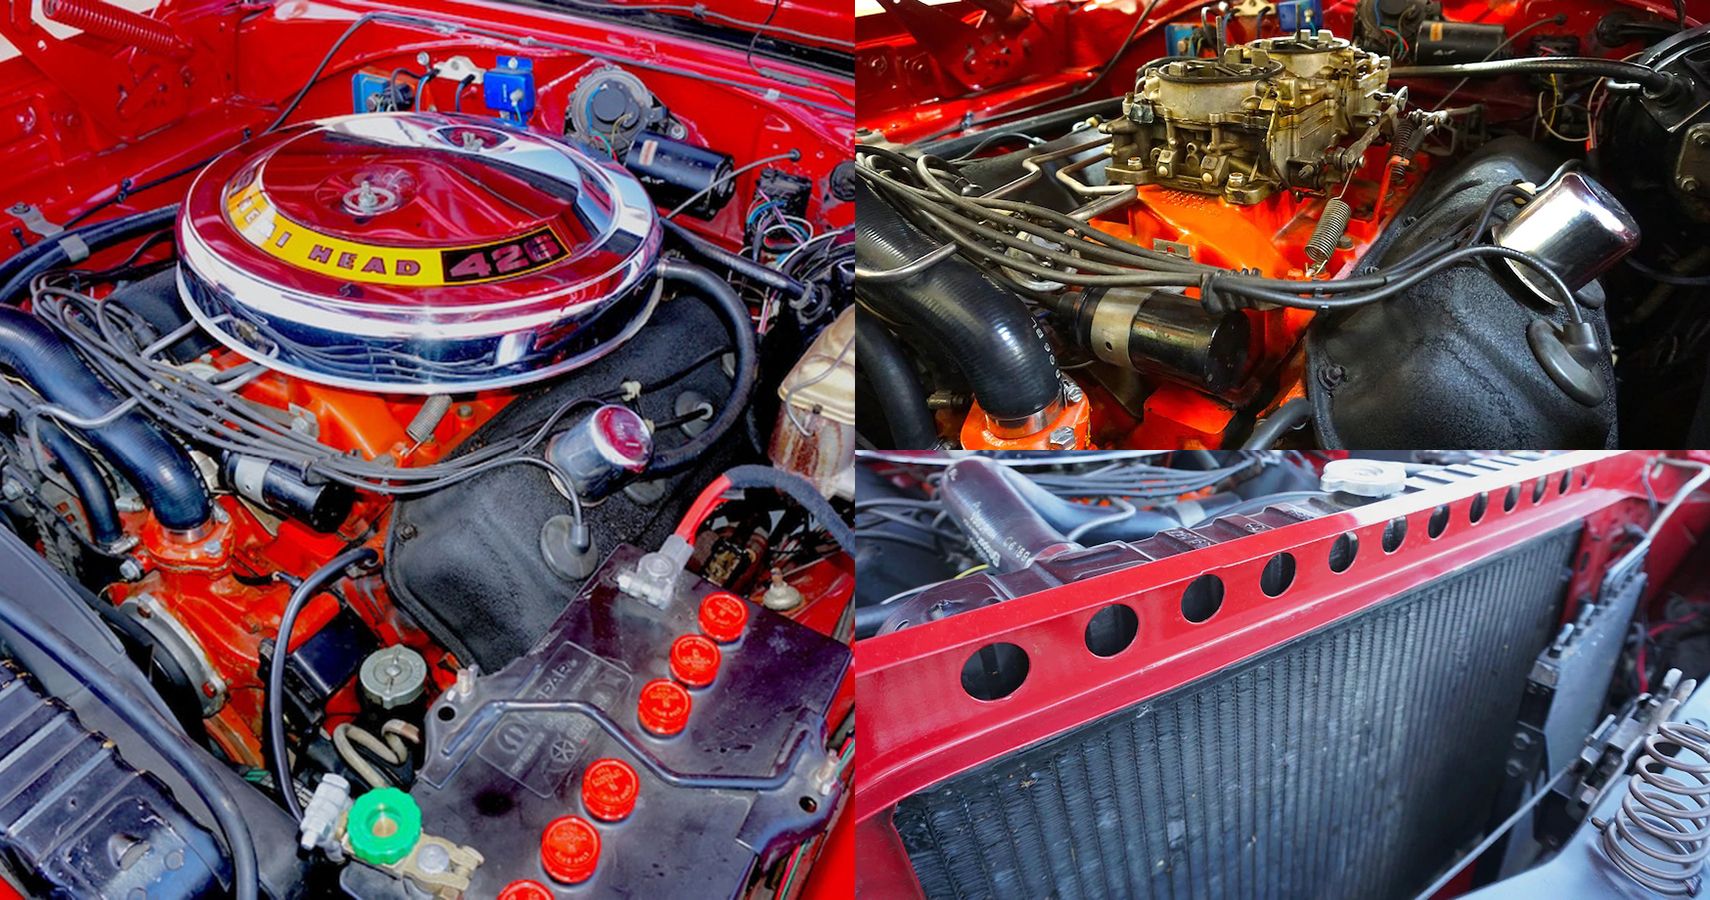 red 1969 Dodge Hemi Charger engine